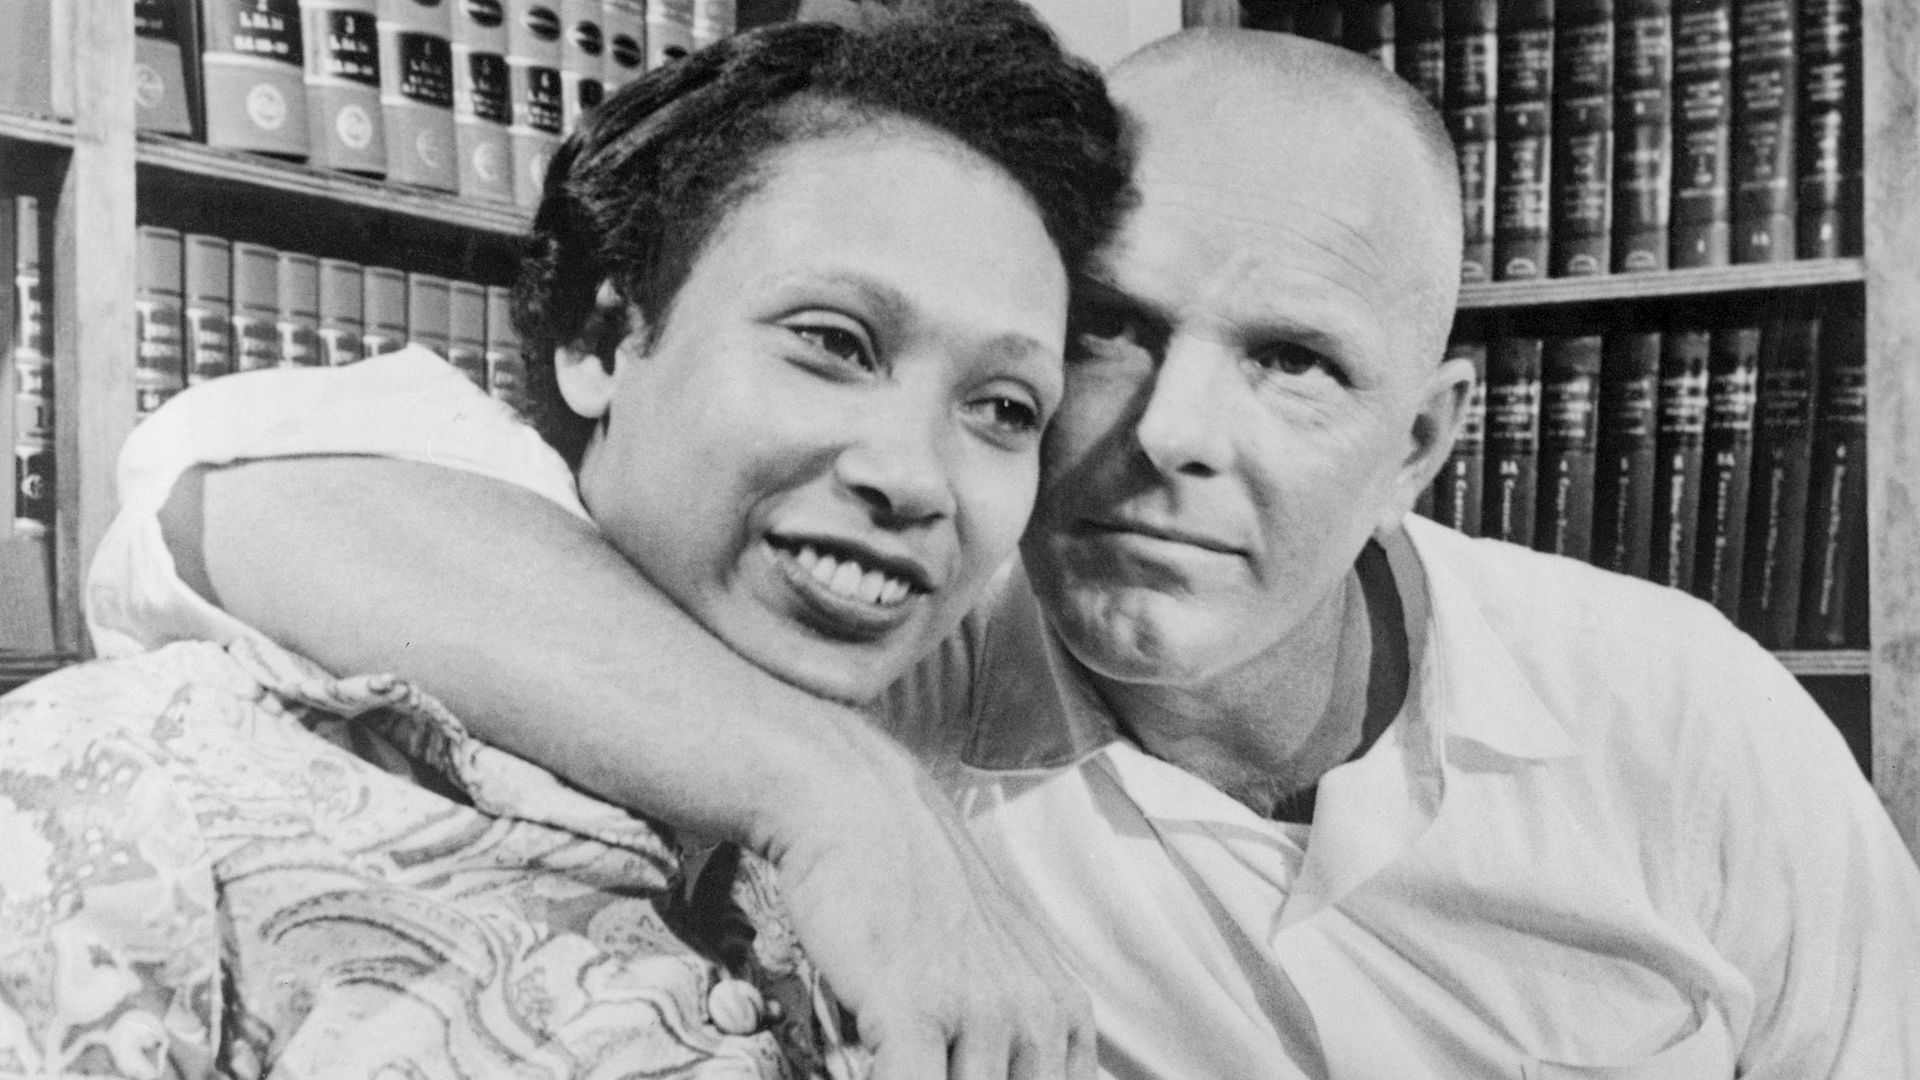 Mildred and Richard Loving, photographed in 1967. He has his arm around her and they're sitting in what looks like a law office. 